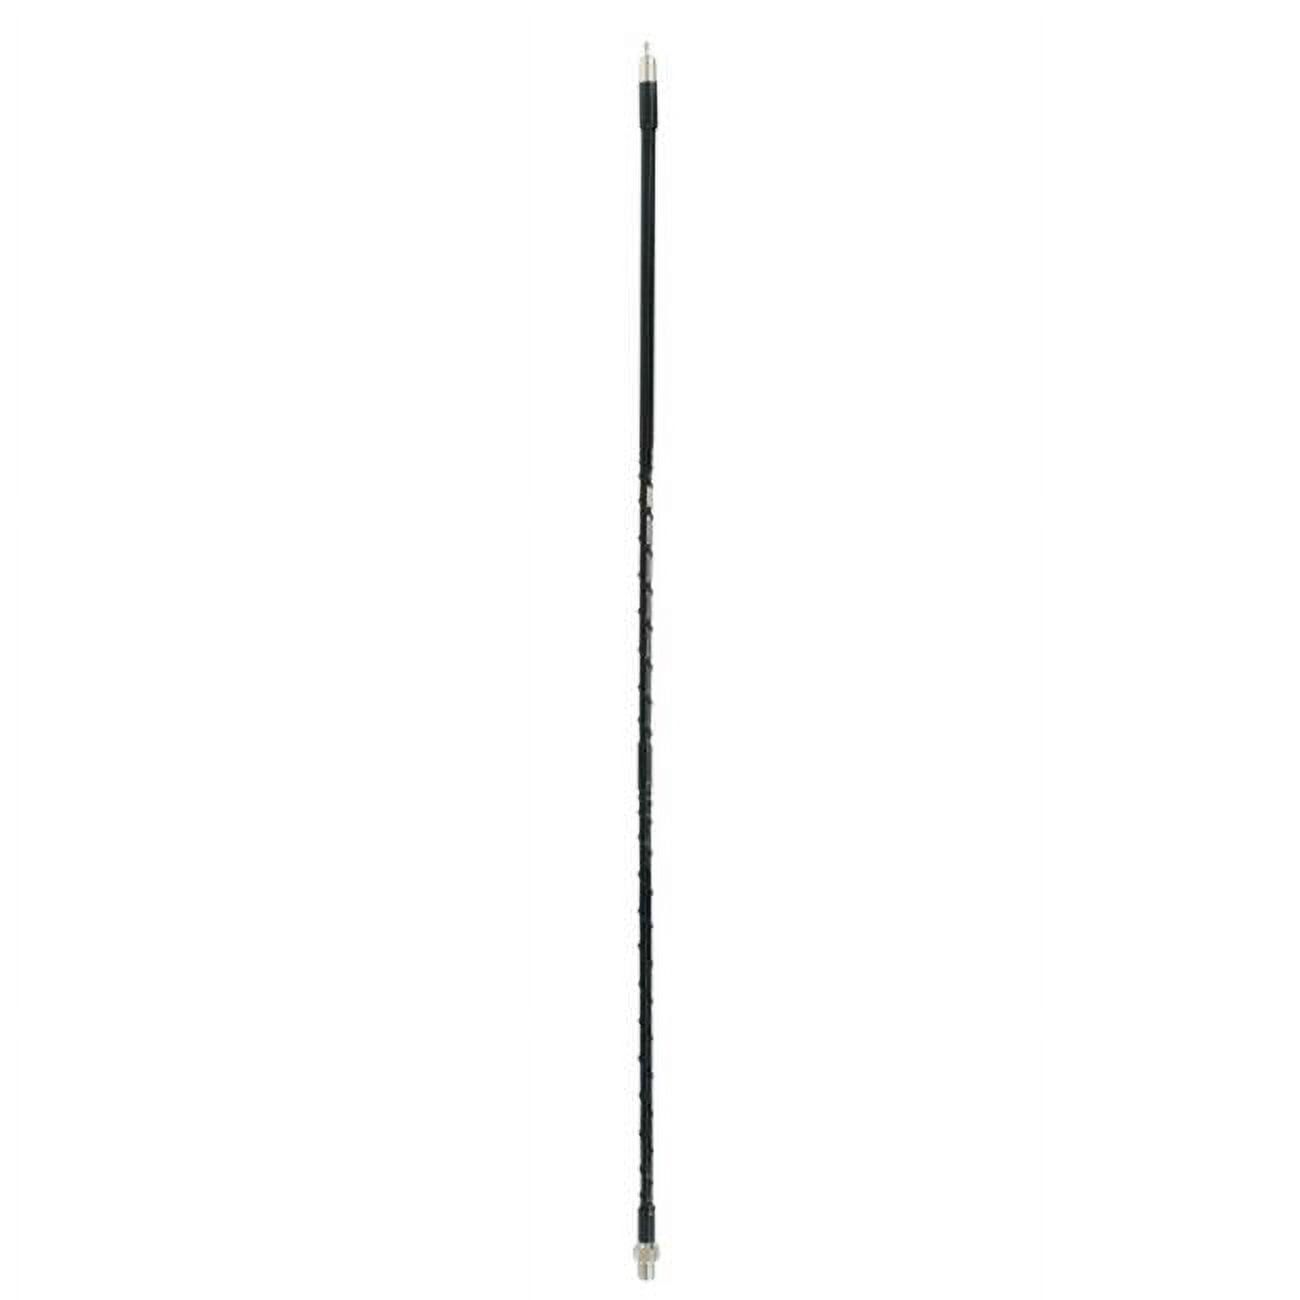 Picture of Accessories Unlimited AUFLEX4-B 0.38 x 24 in. 4 ft. Superflex CB Antenna with Tunable Tip, Black